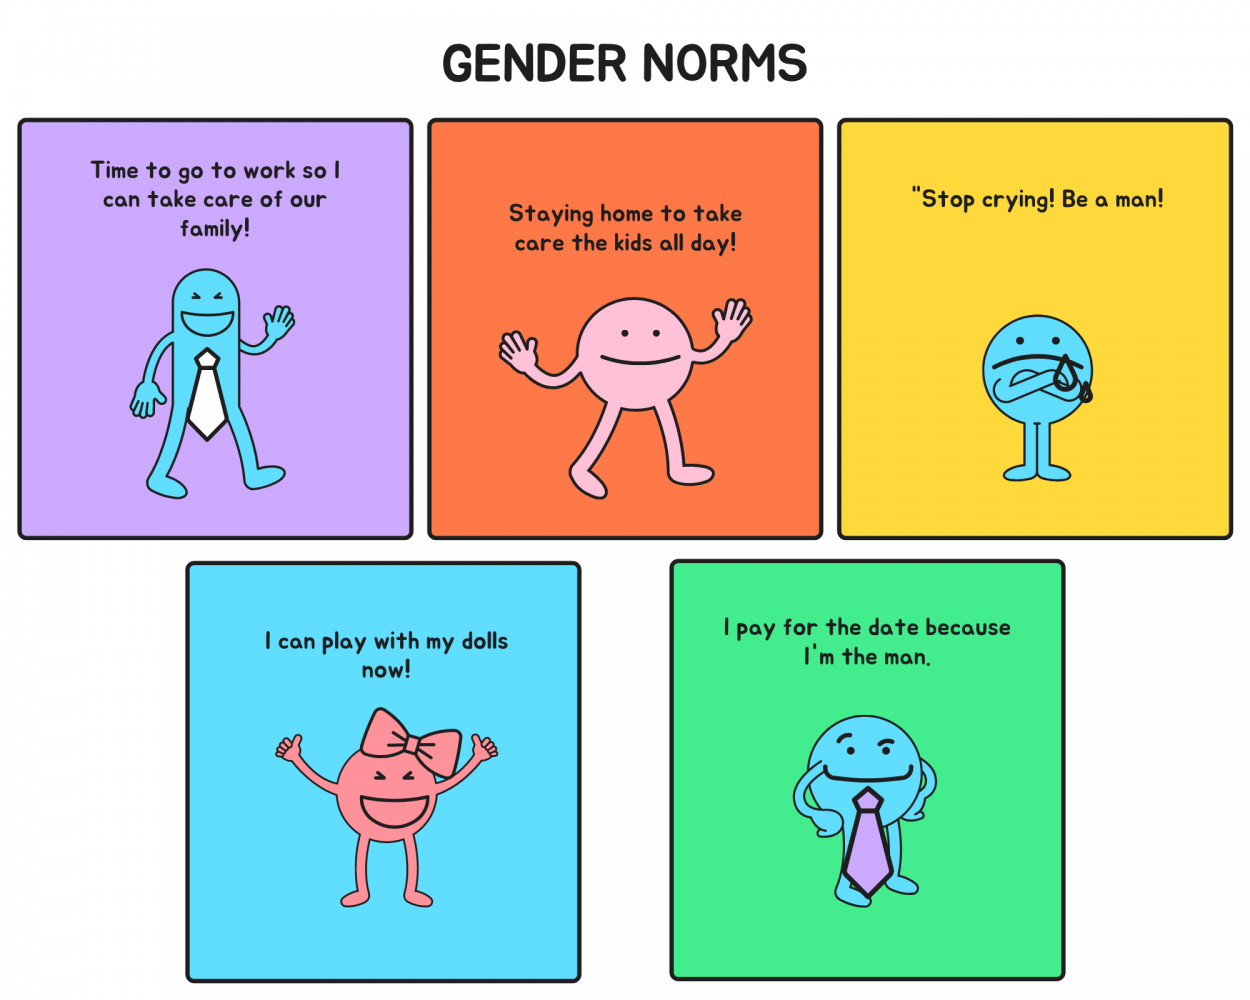 Gender norms are still the norm